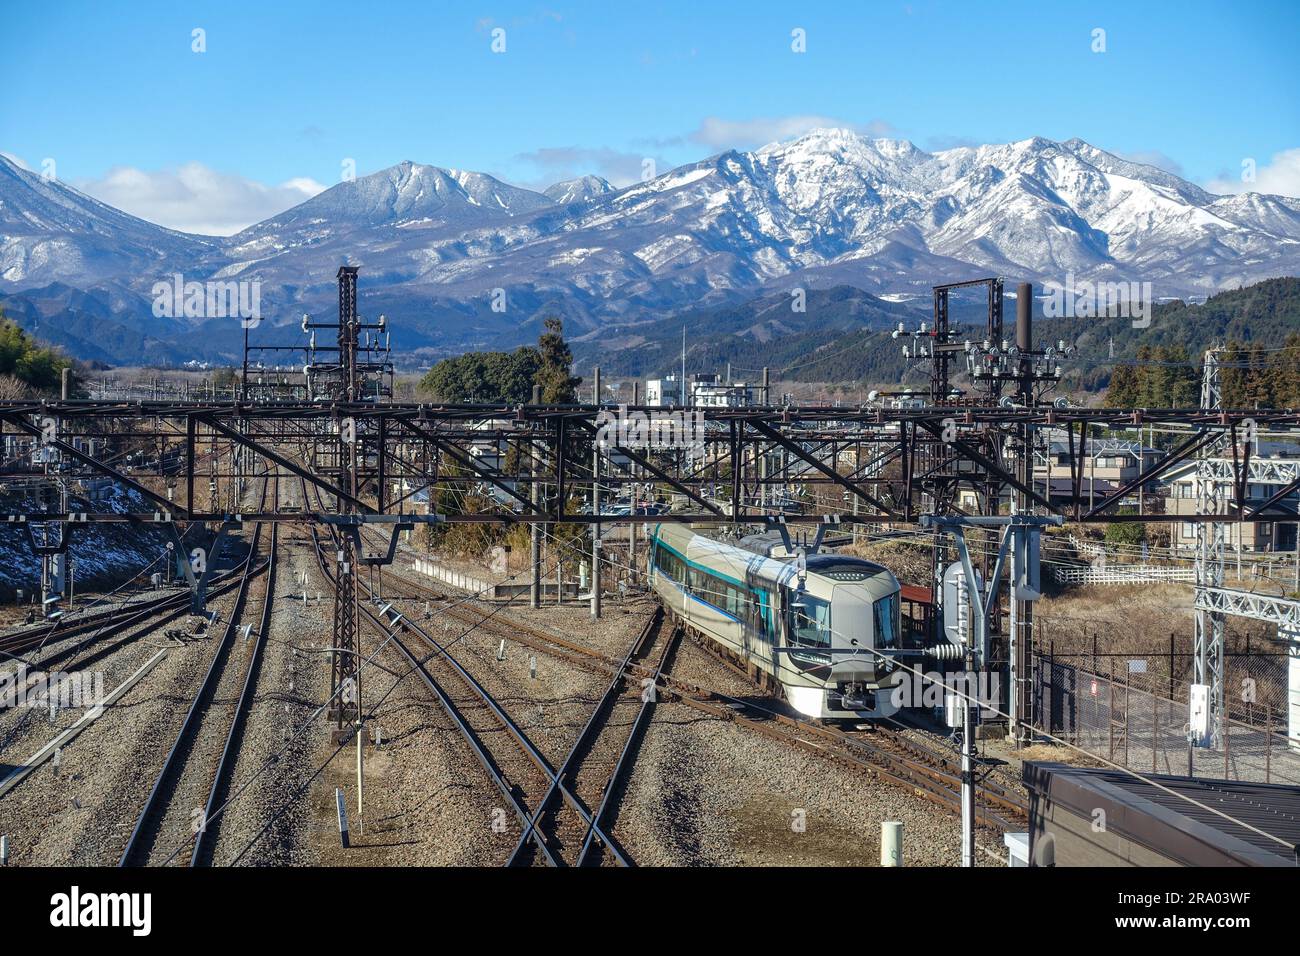 Nikko train station, rails, with snowy Japanese Alps in the backgound Stock Photo